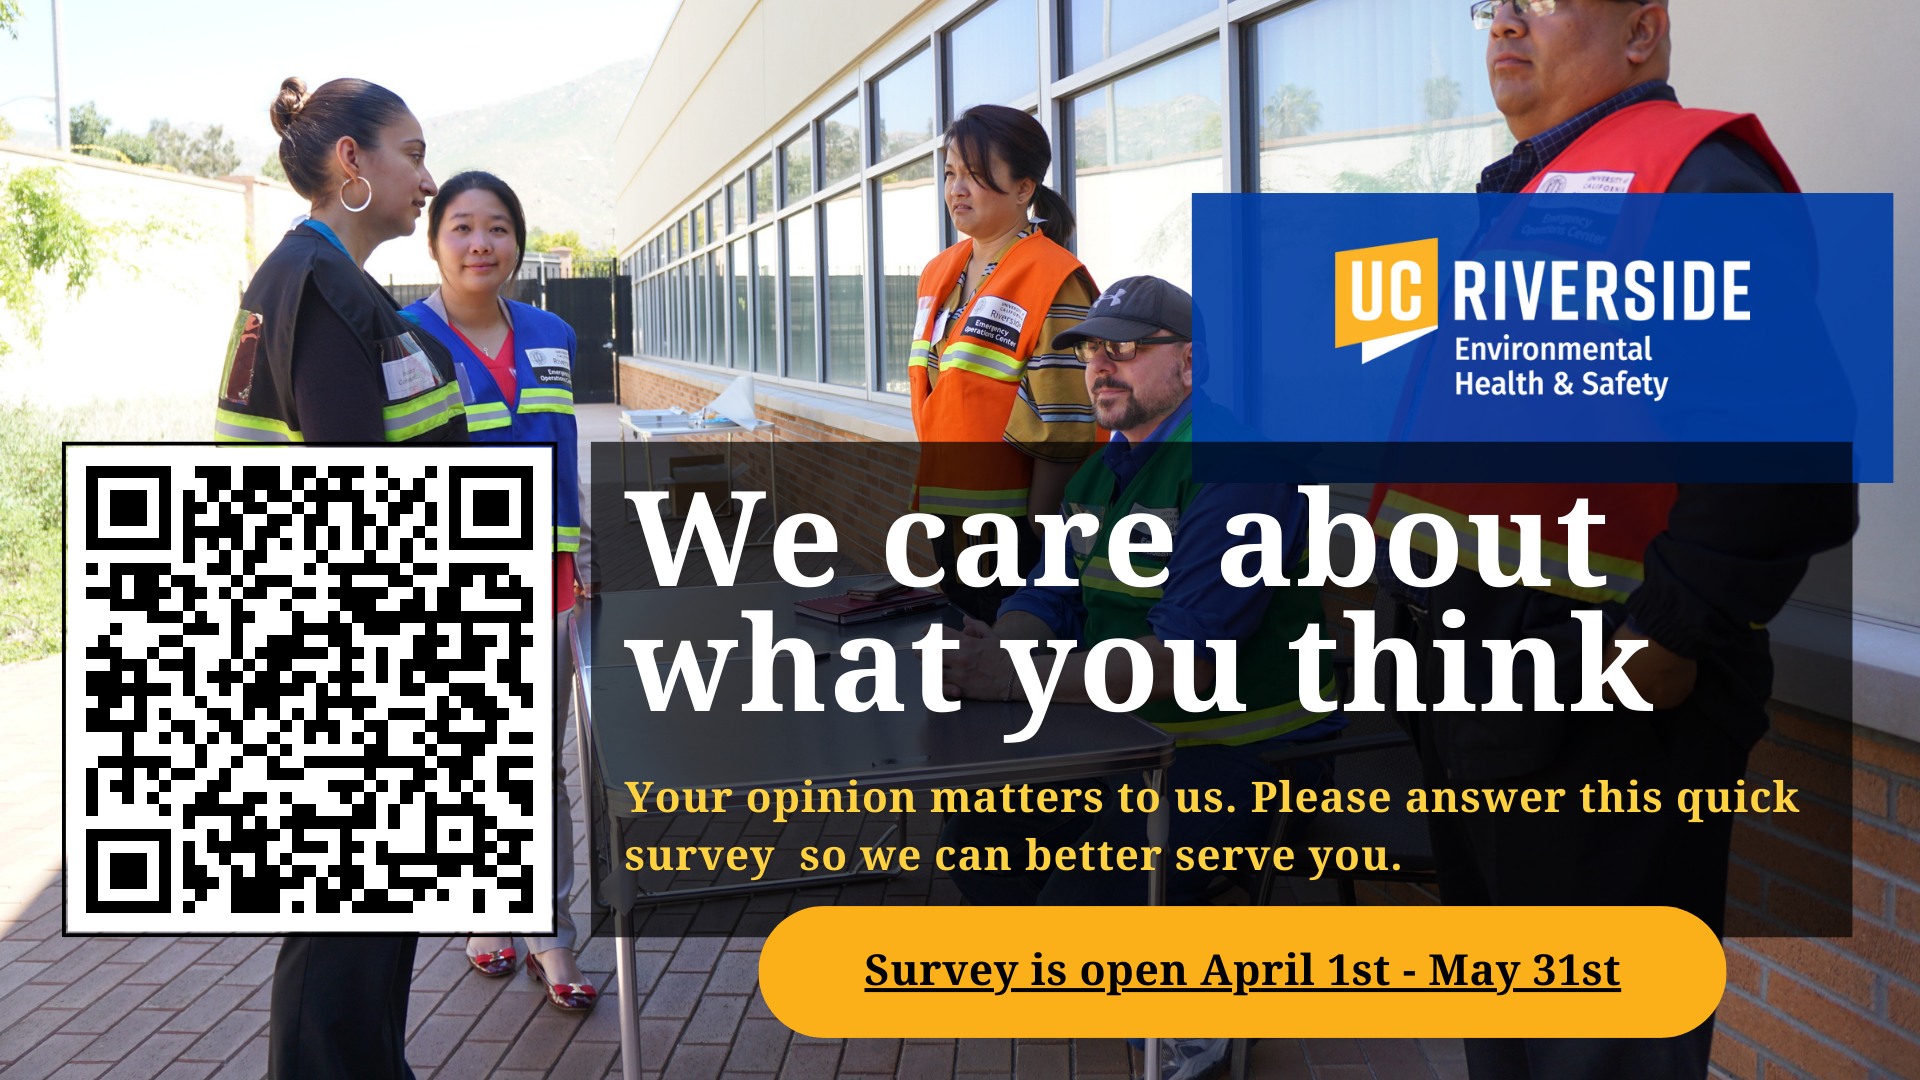 Group of five staff wearing emergency vests standing around a table and talking. QR Code and UC Riverside Environmental Health & Safety logo displays. Message on screen says, "We care about what you think. Your opinion matters to us. Please answer this quick survey so we can better serve you. Survey is open April 1st - May 31st."